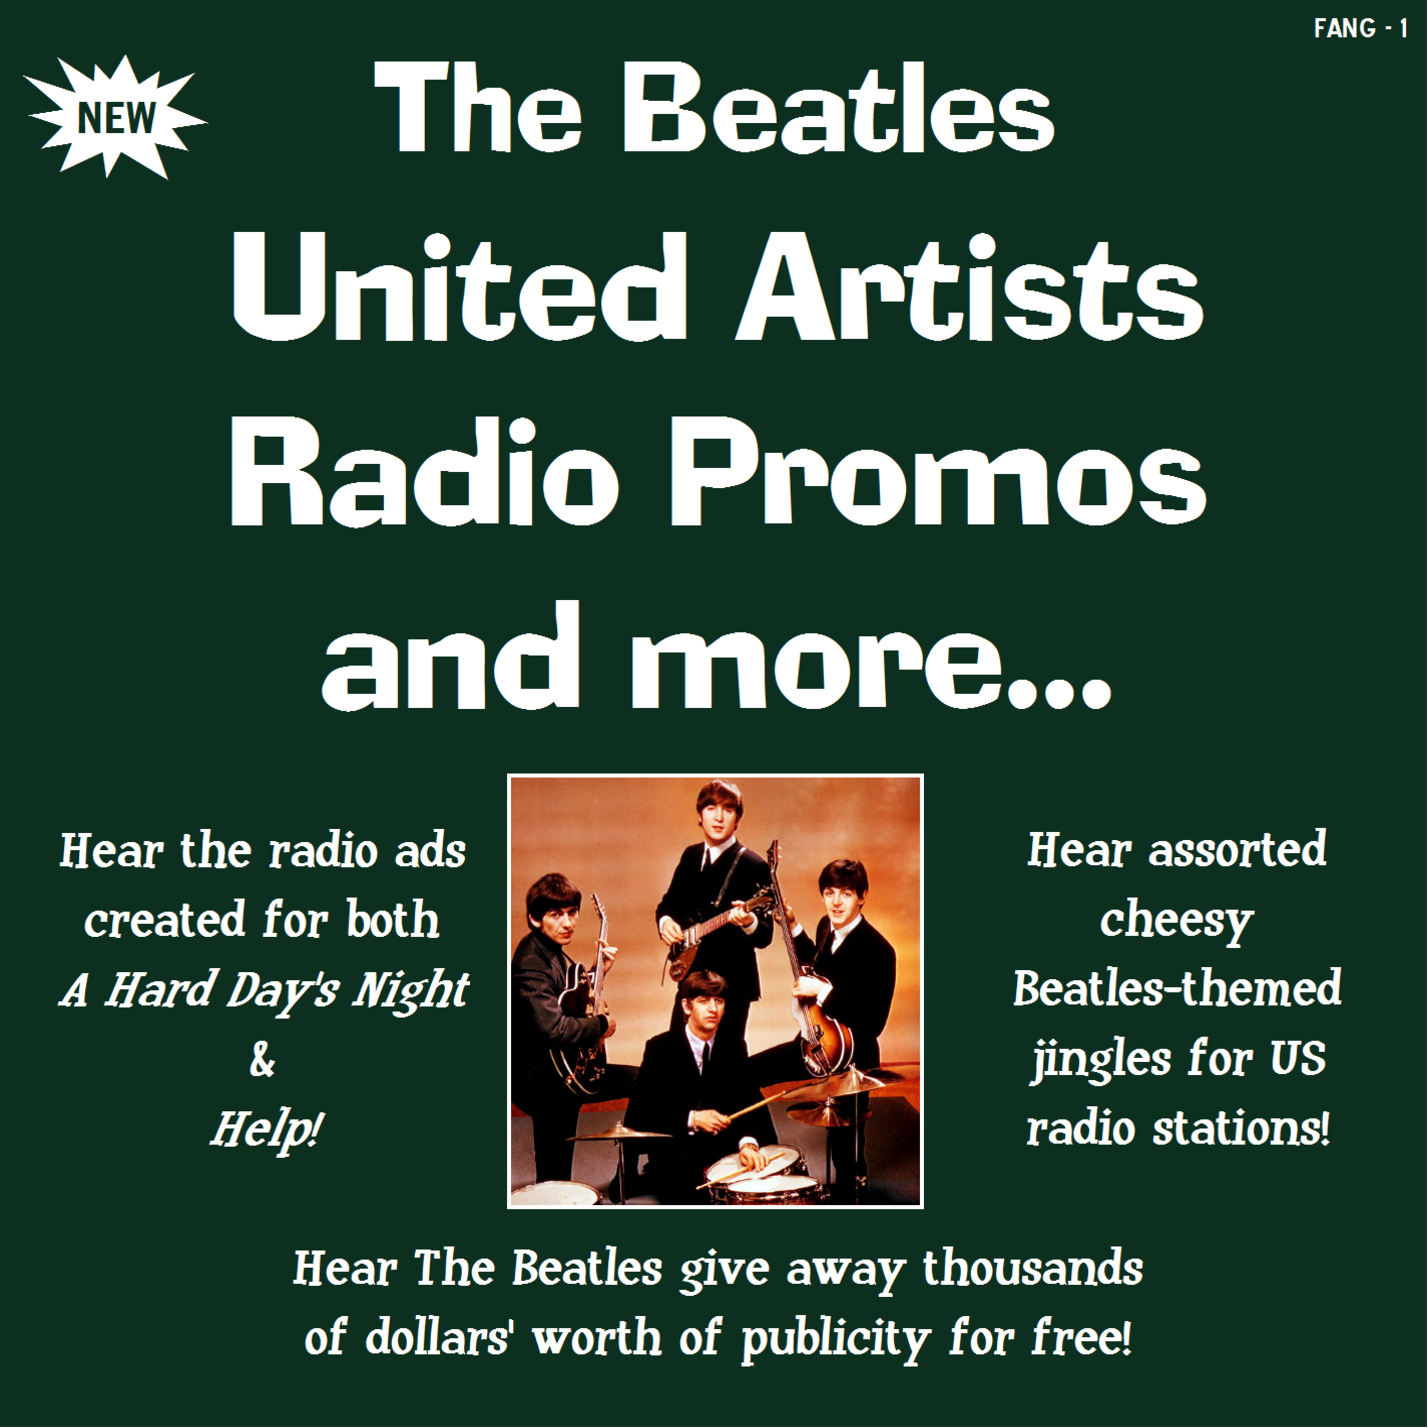 United Artists Radio Promos and more - front.png